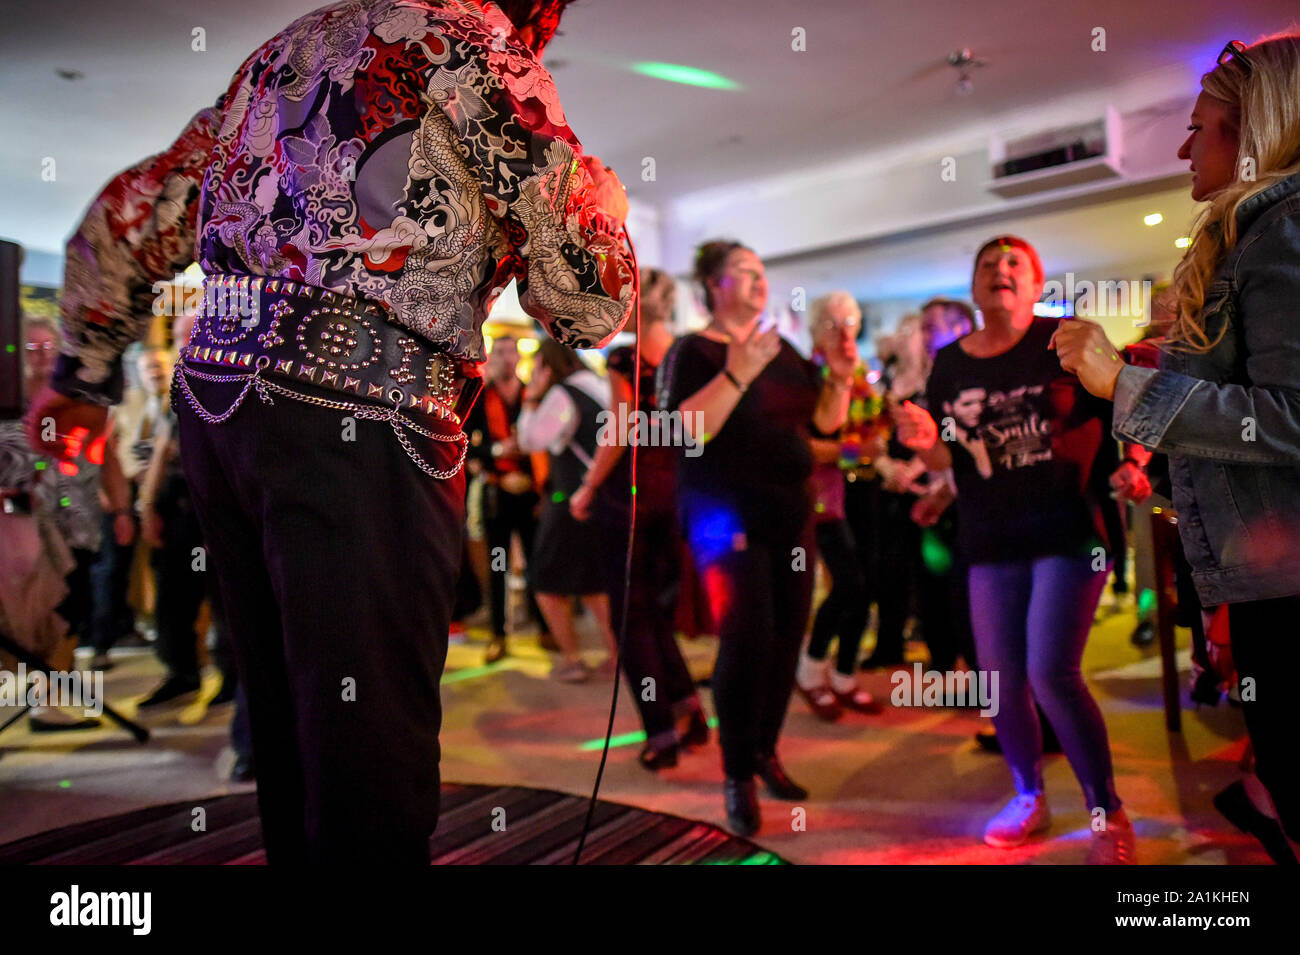 People dance to an Elvis performer inside a pub at the annual Porthcawl Elvis Festival in south Wales. The event draws thousands of Elvis fans to the Welsh seaside town to celebrate the 'King of Rock and Roll'. Stock Photo